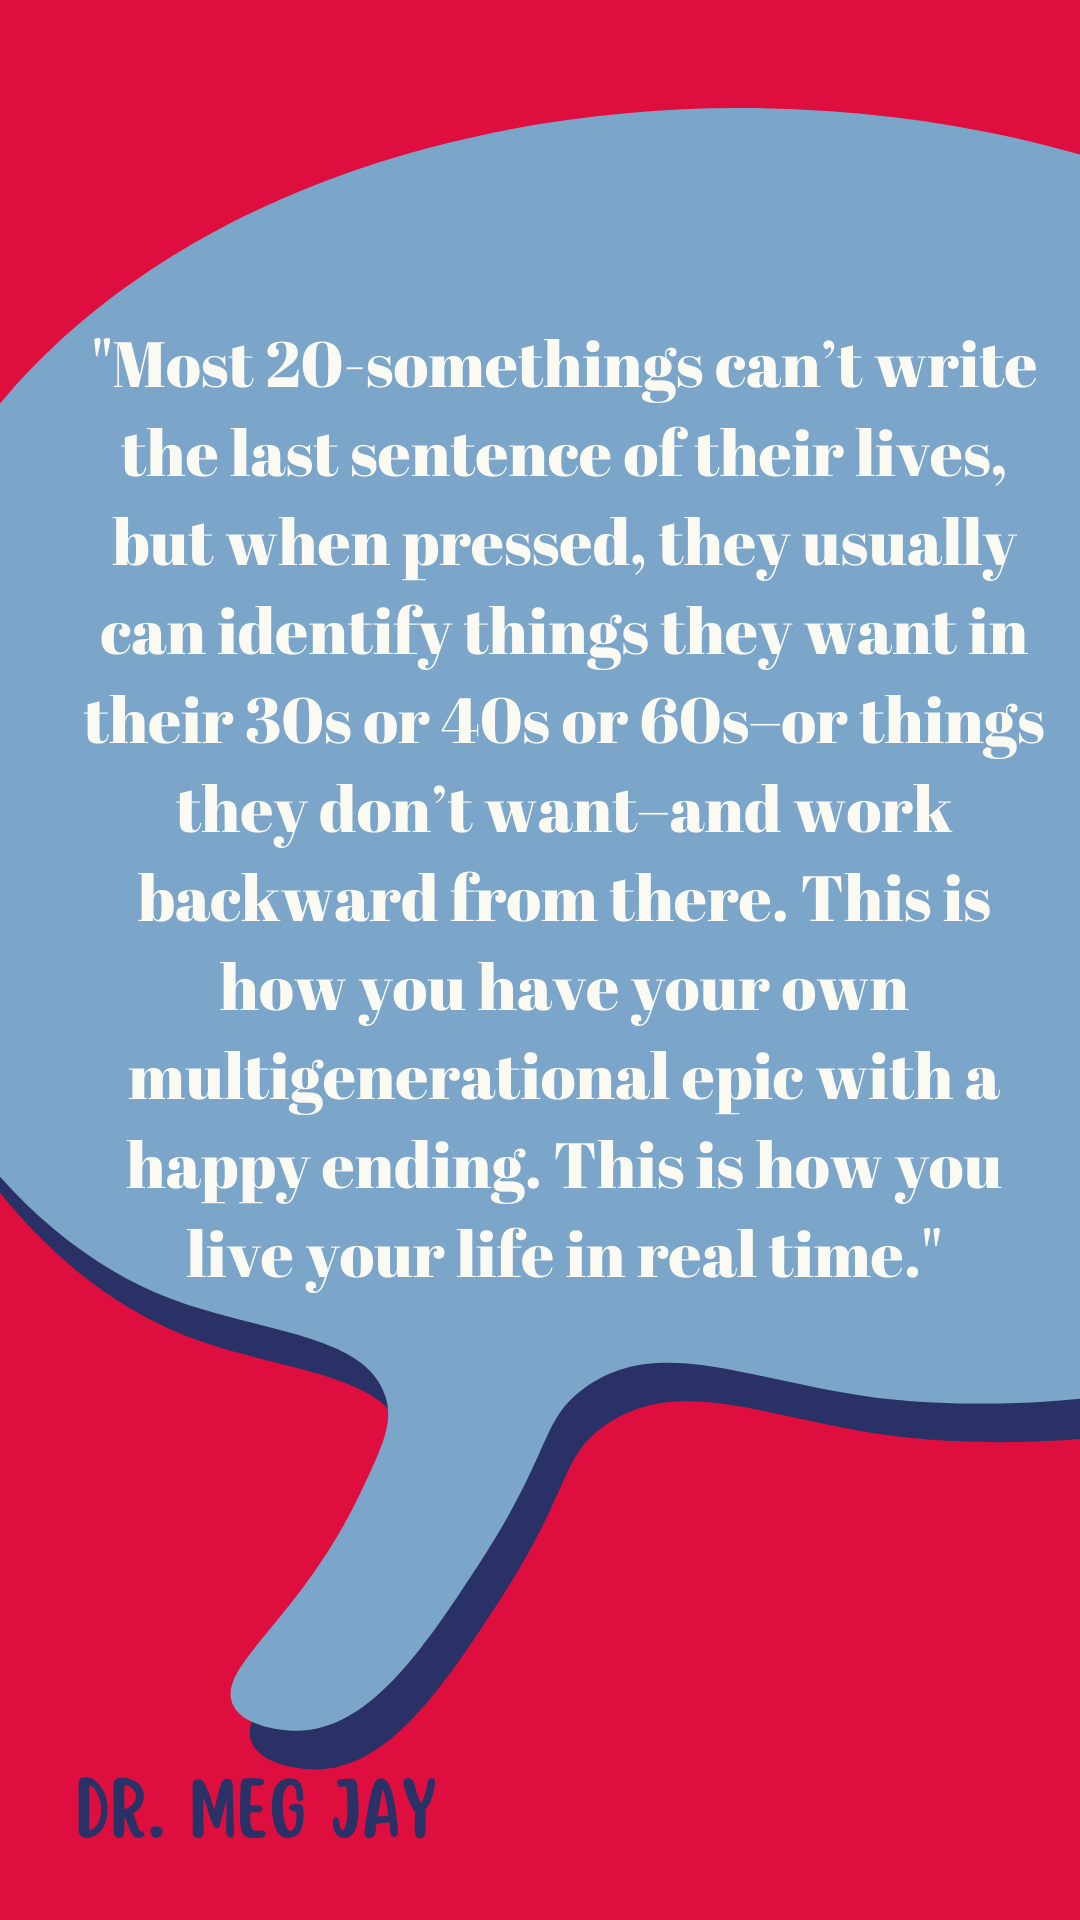 “Most 20-somethings can’t write the last sentence of their lives, but when pressed, they usually can identify things they want in their 30s or 40s or 60s–or things they don’t want–and work backward from there. This is how you have your own multigenerational epic with a happy ending. This is how you live your life in real time,” according to Dr. Meg Jay.